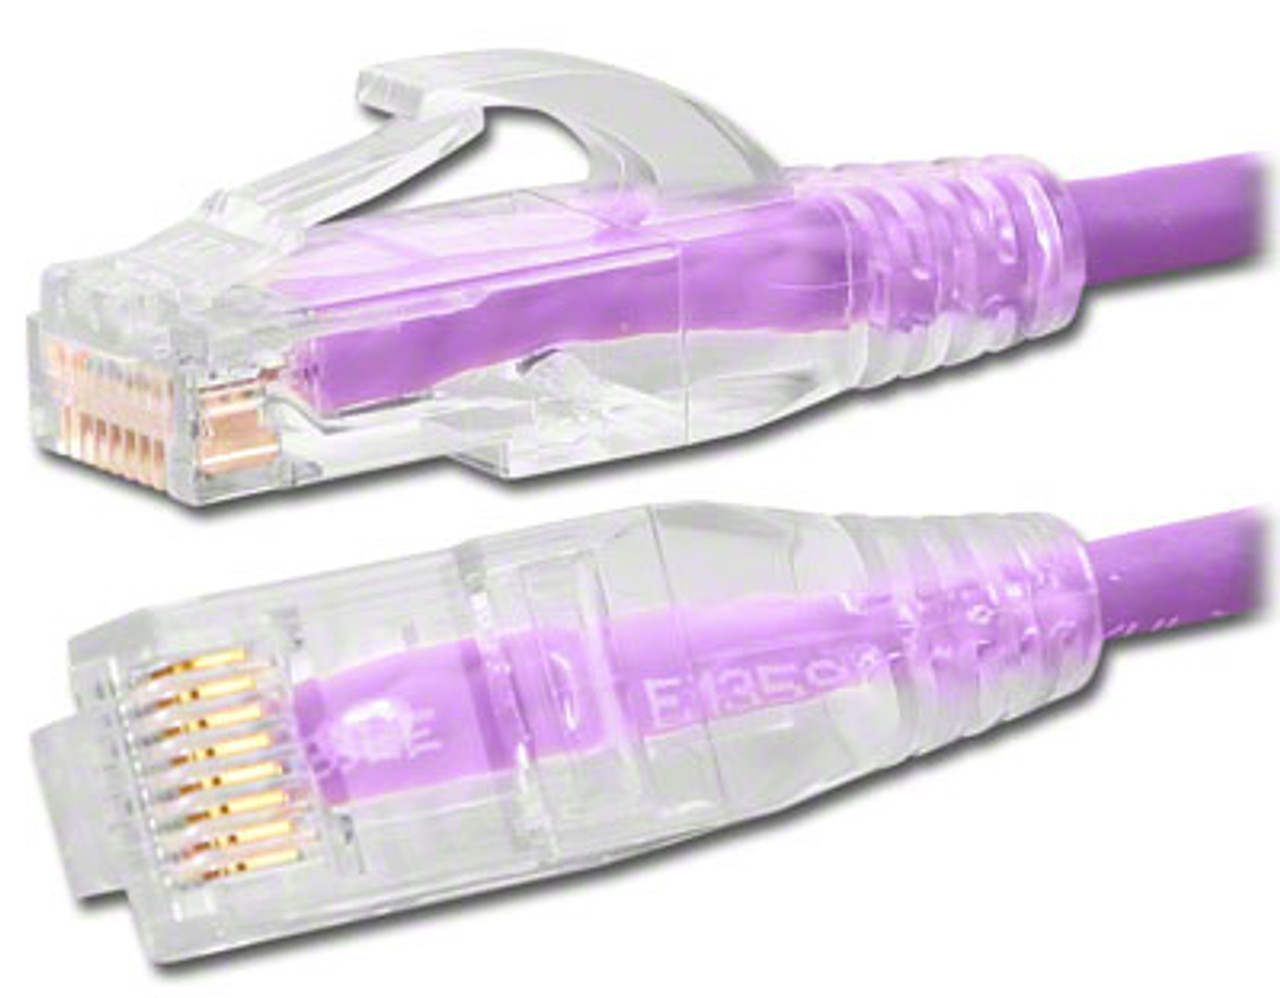 7-Foot - Mini Cat 6 Thin Patch Cable - Violet Jacket - DC-56NP-7'VLTB - TMB